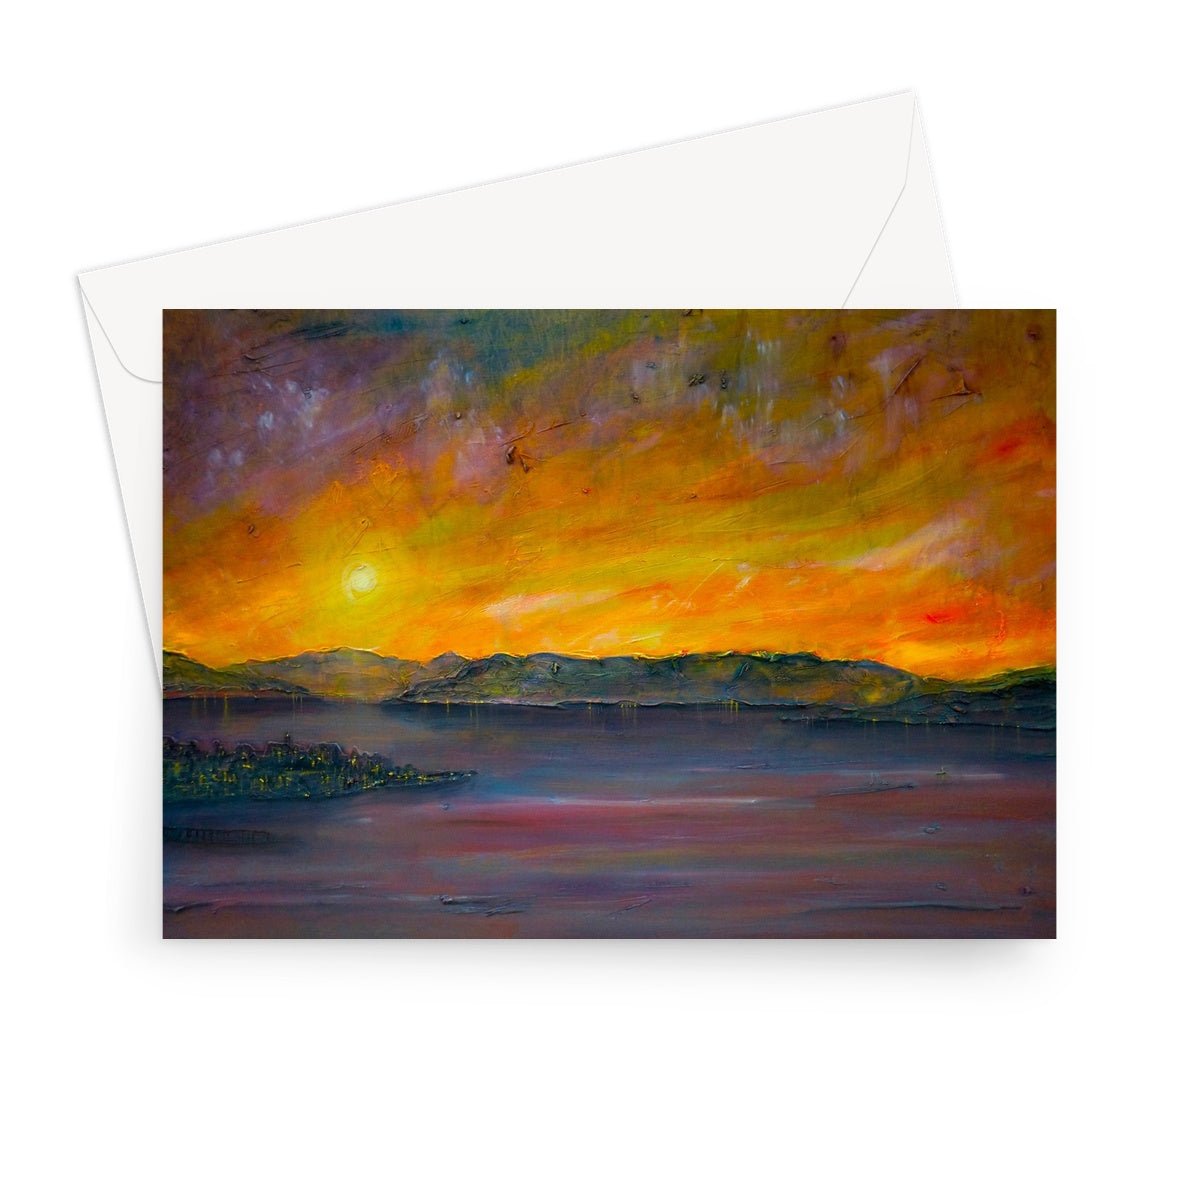 Sunset Over Gourock Art Gifts Greeting Card-Greetings Cards-River Clyde Art Gallery-7"x5"-1 Card-Paintings, Prints, Homeware, Art Gifts From Scotland By Scottish Artist Kevin Hunter